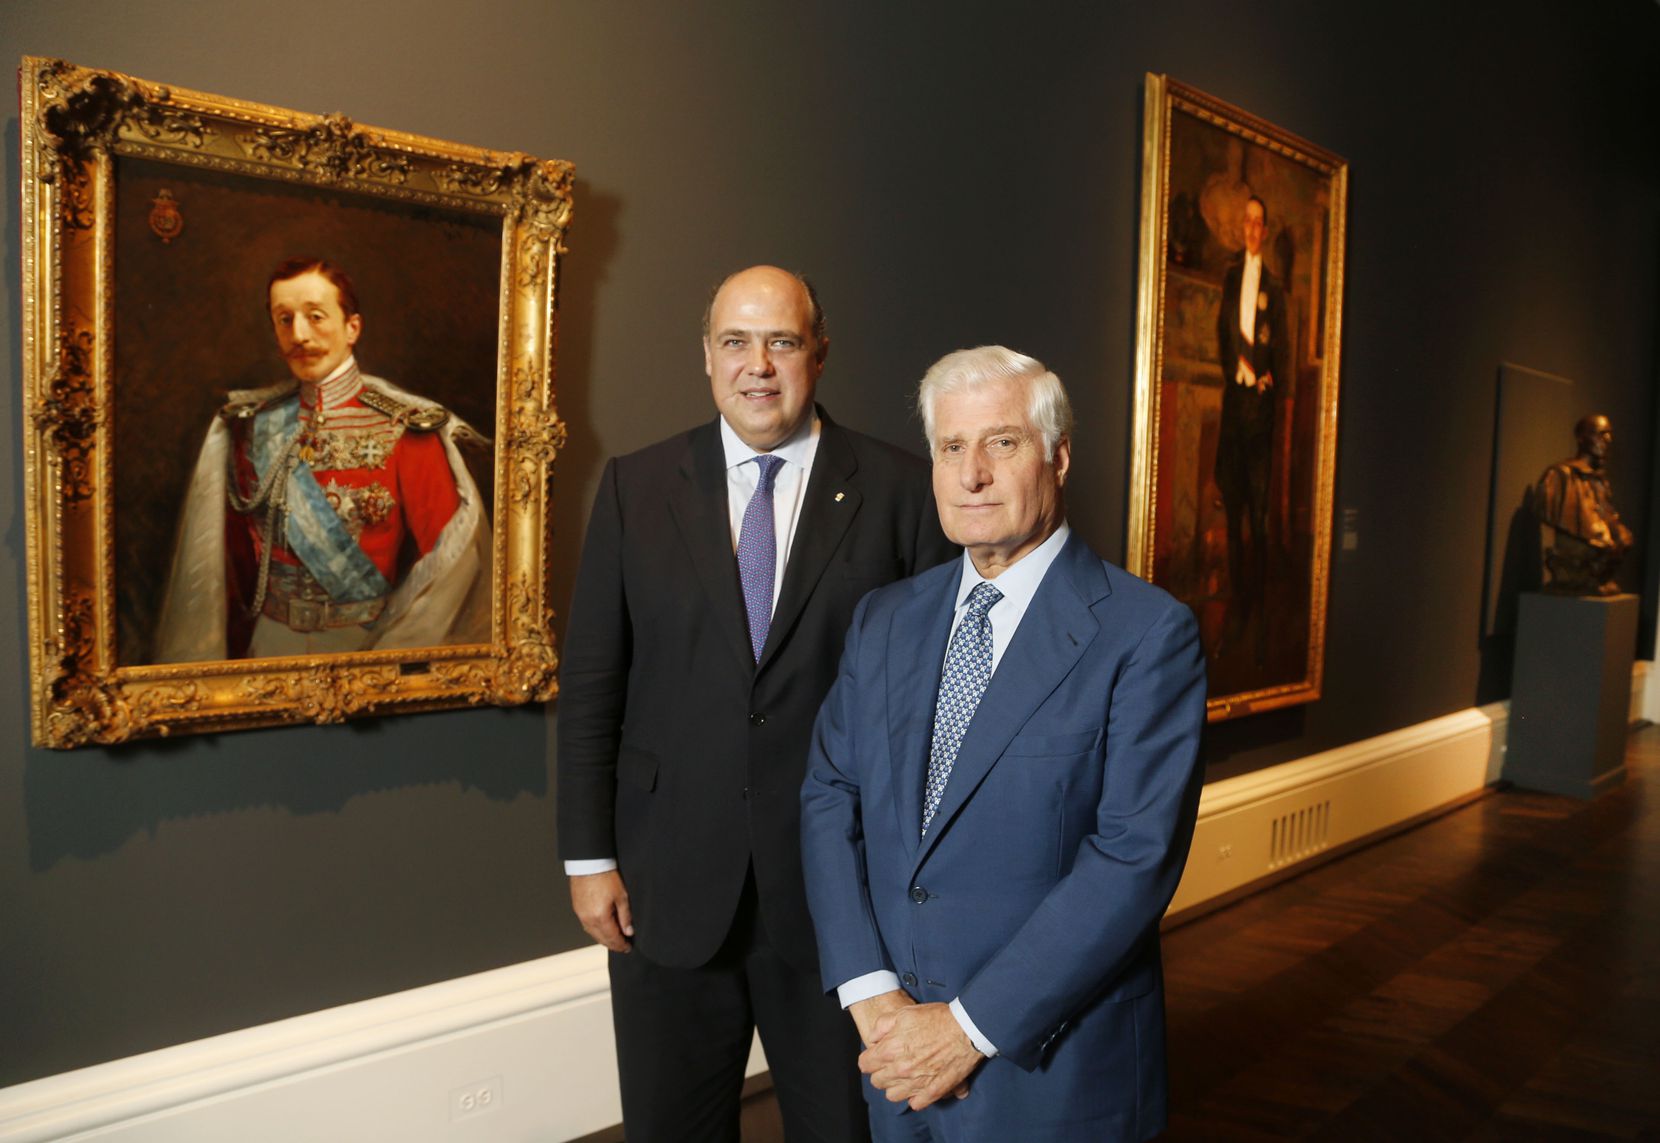 Roglán and the 19th Duke of Alba pose before portraits of the 16th (left) and 17th (right) Dukes of Alba at "Treasures From the House of Alba: 500 Years of Art and Collecting."